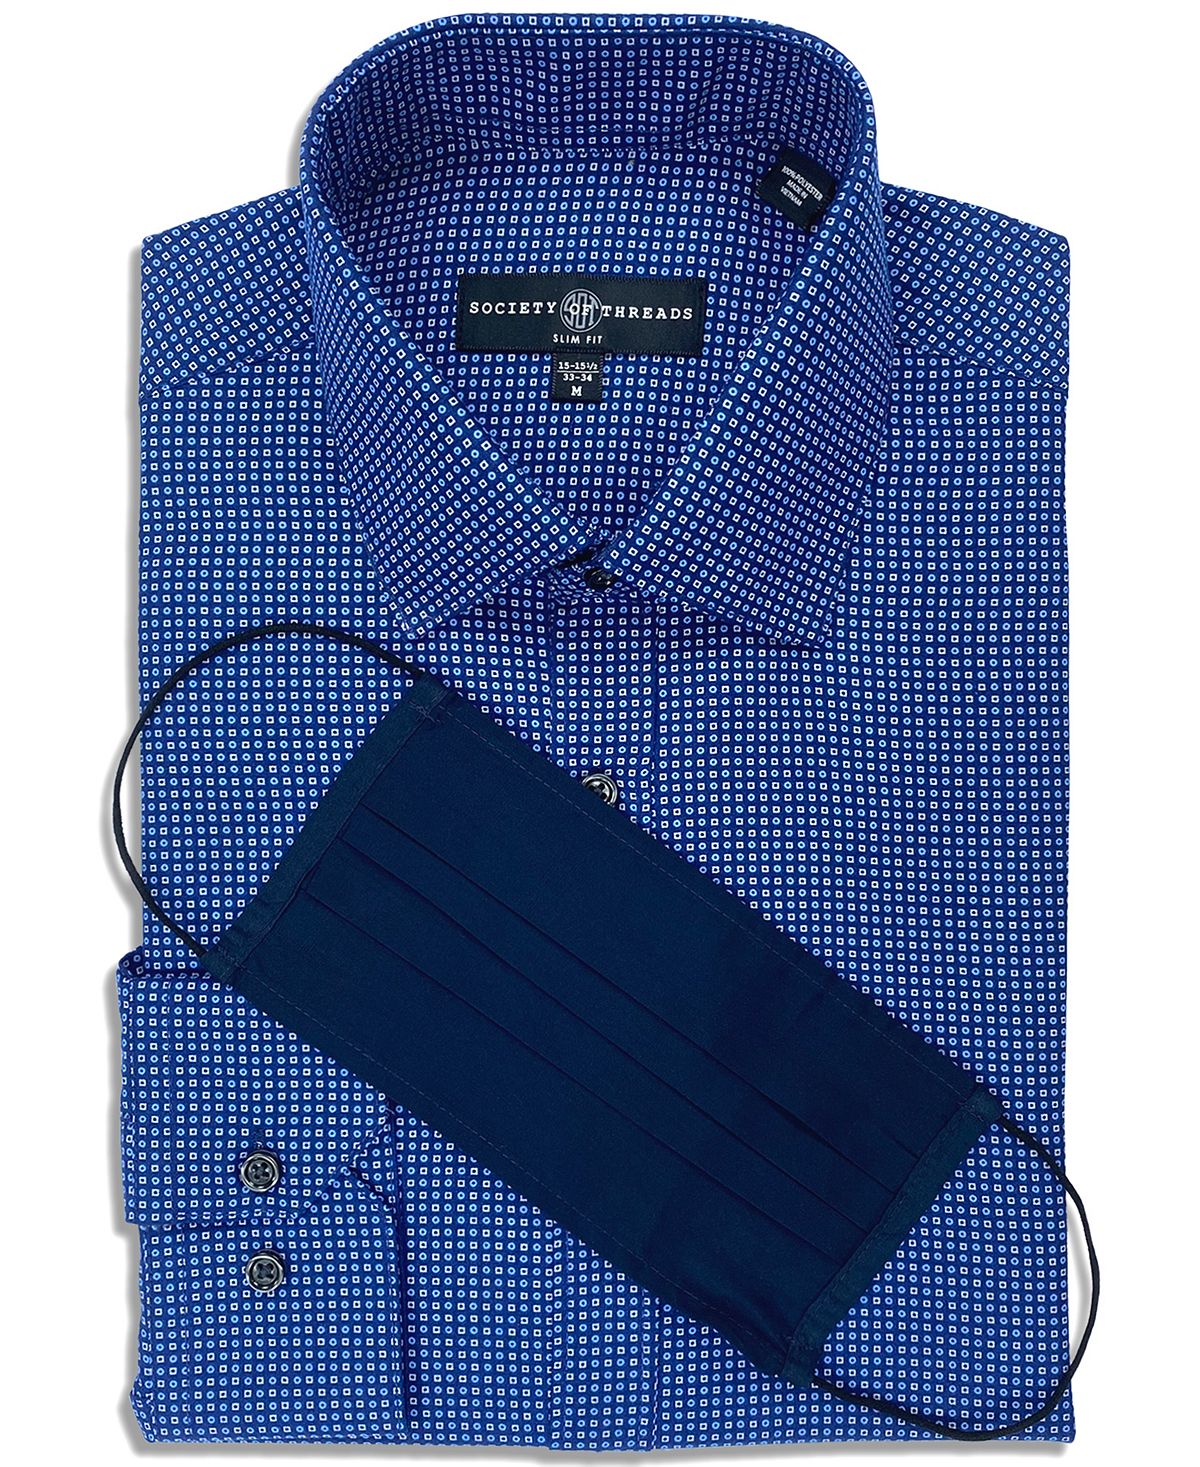 Society Of Threads Slim-fit Non-iron Performance Stretch Geo-print Dress Shirt With Pleated Face Mask Navy